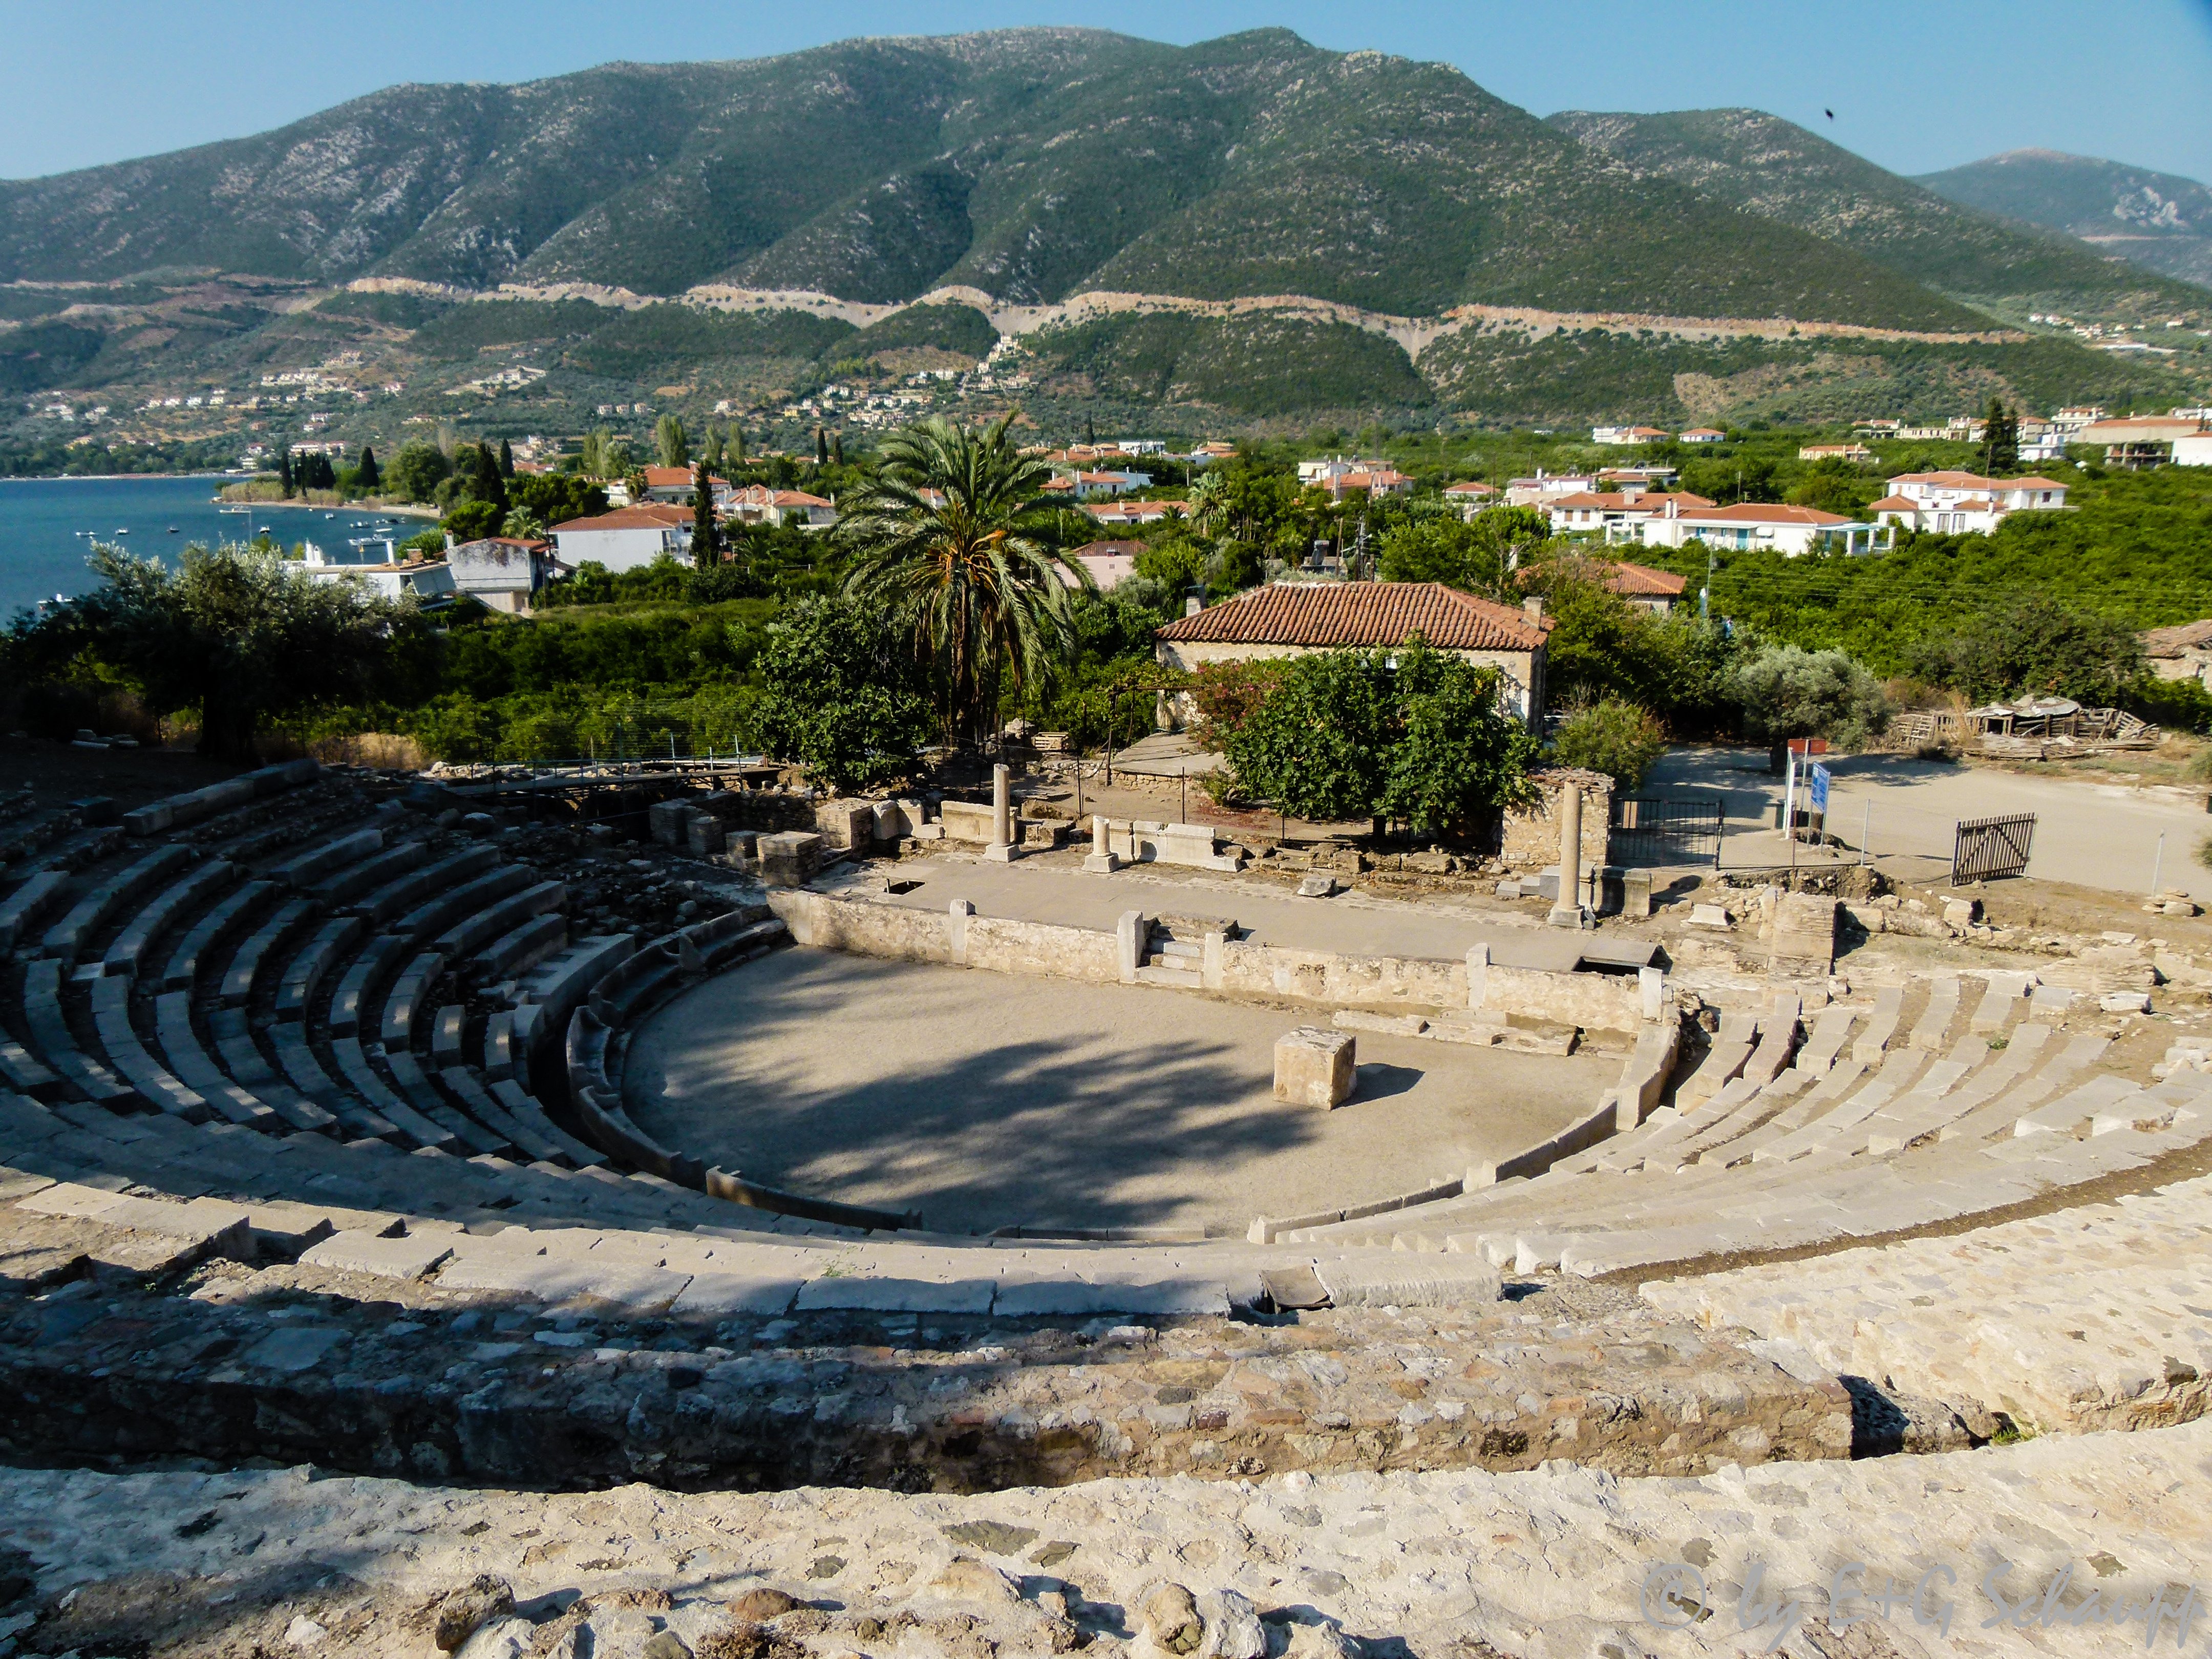 Ancient theater. Амфитеатр Эпидавр Греция. Эпидавр Греция театр. Амфитеатр в Эпидавре. Древний театр Эпидавра.